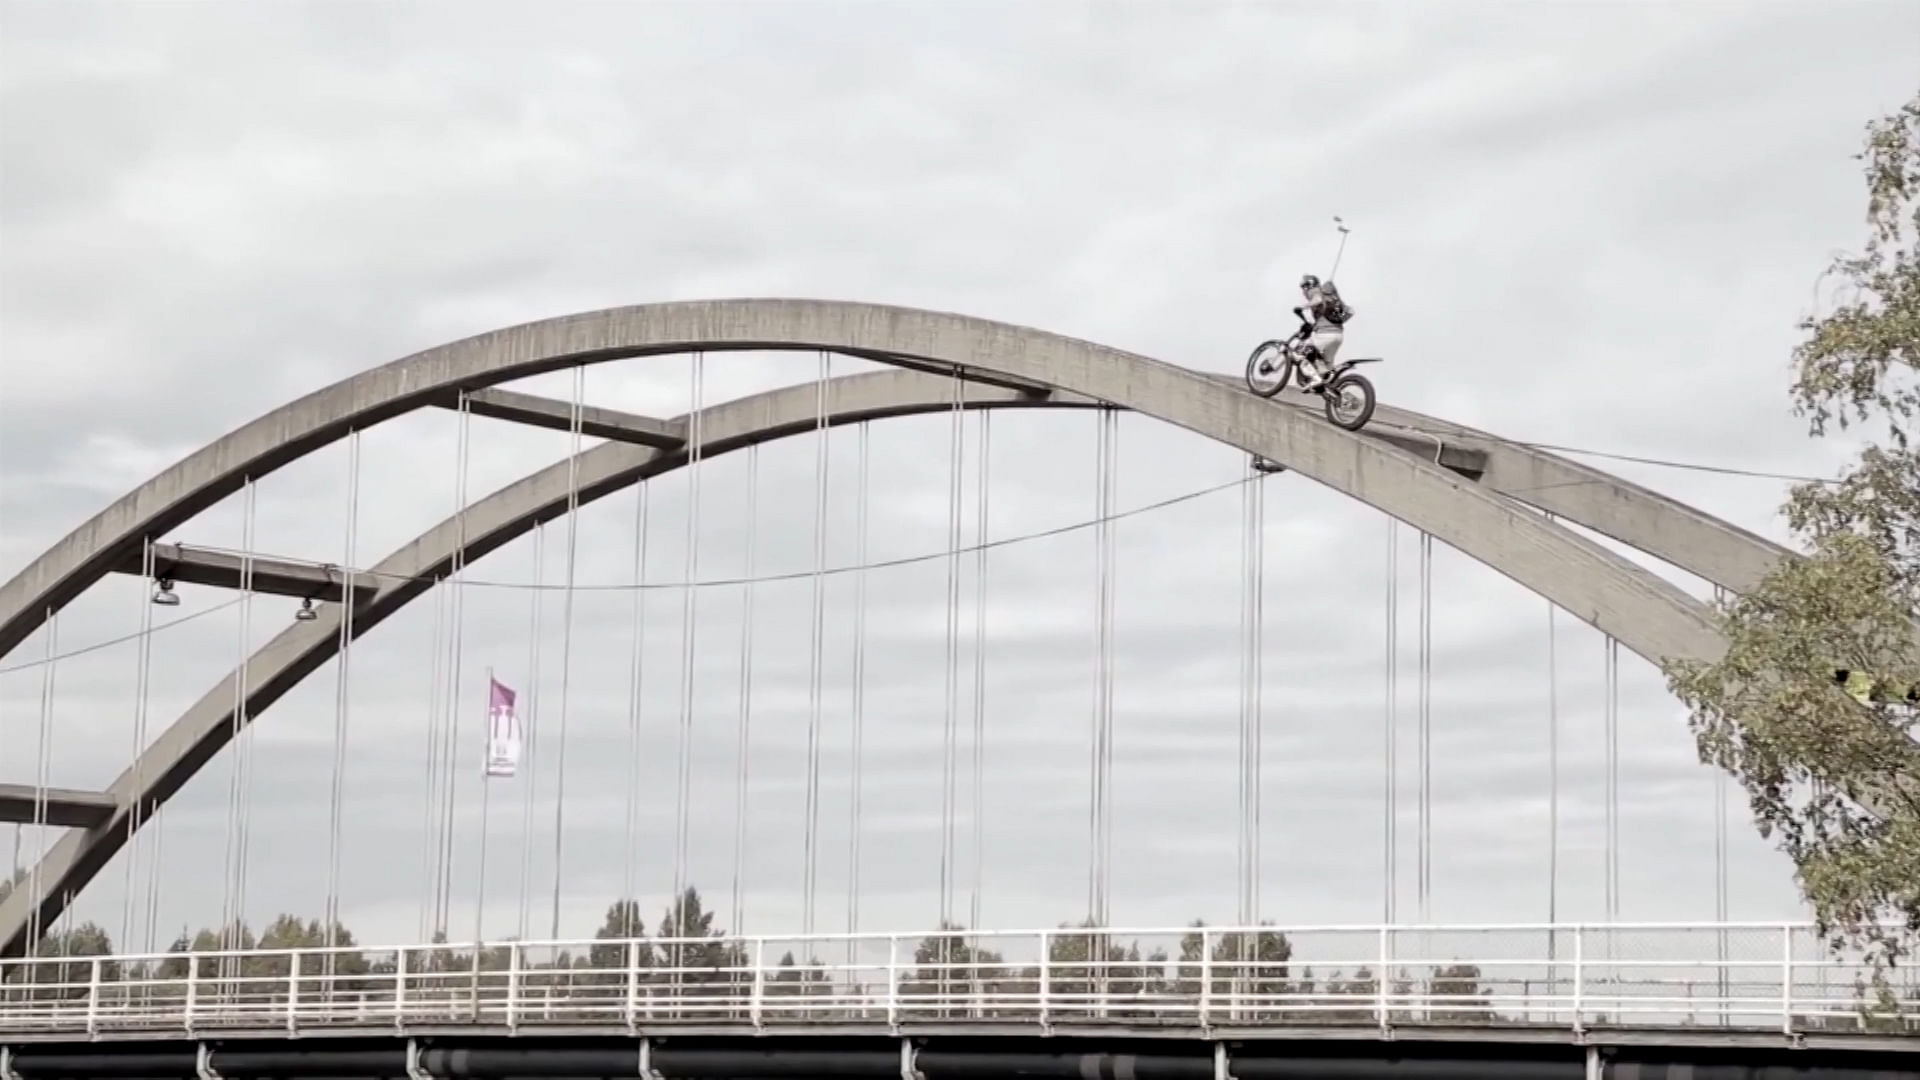 

Antti Pendikainen used his trial bike to ride over the suspension railings on the side of a bridge near Helsinki. (Photo: AP screengrab)